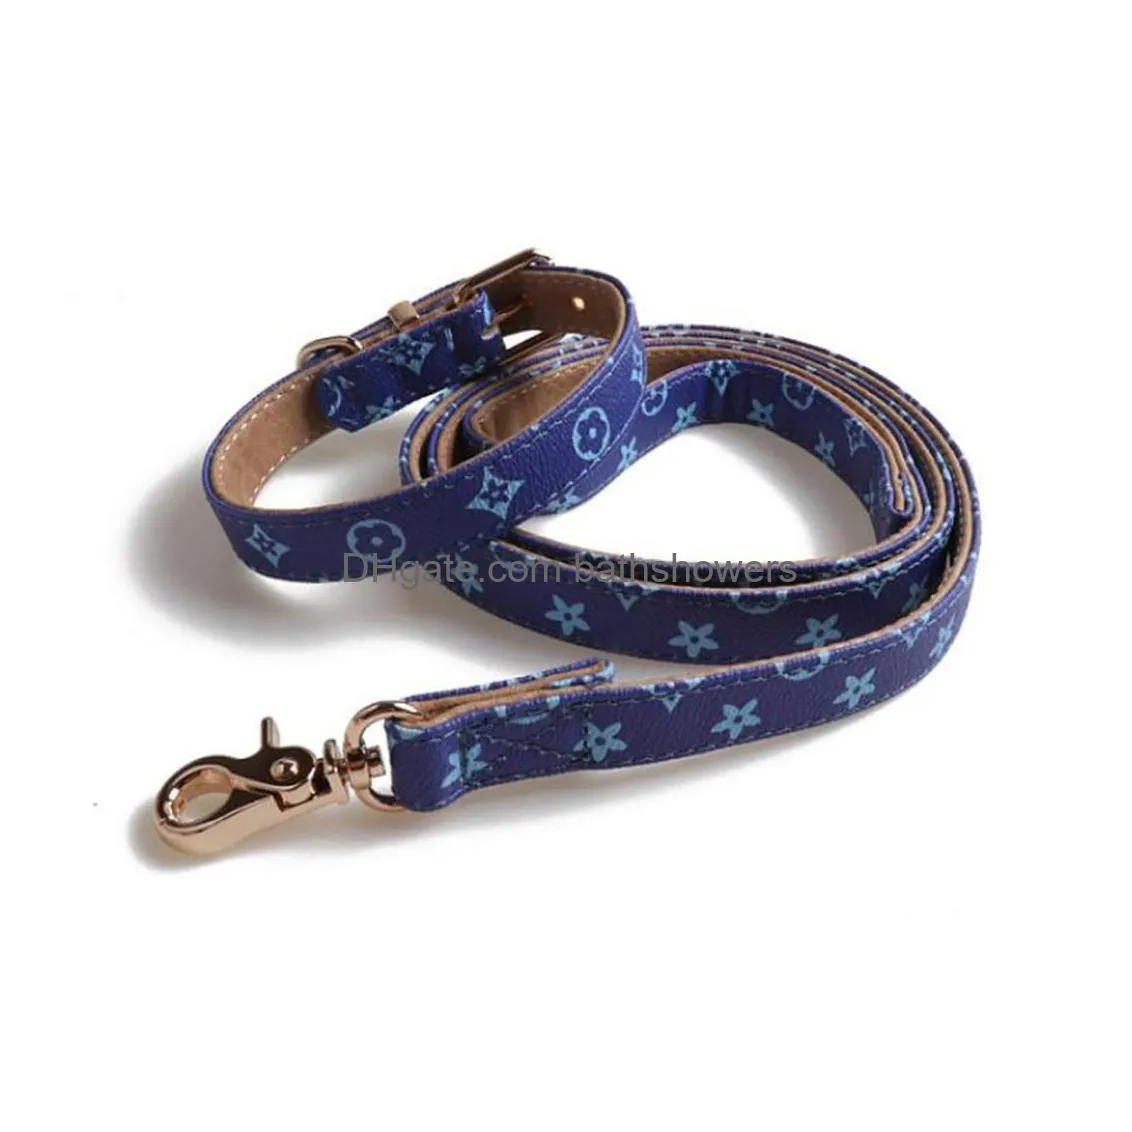 dhs luxury designer dog collar pattern pu leather pets collars adjustable brand cat leashes outdoor personality pet collar accessories